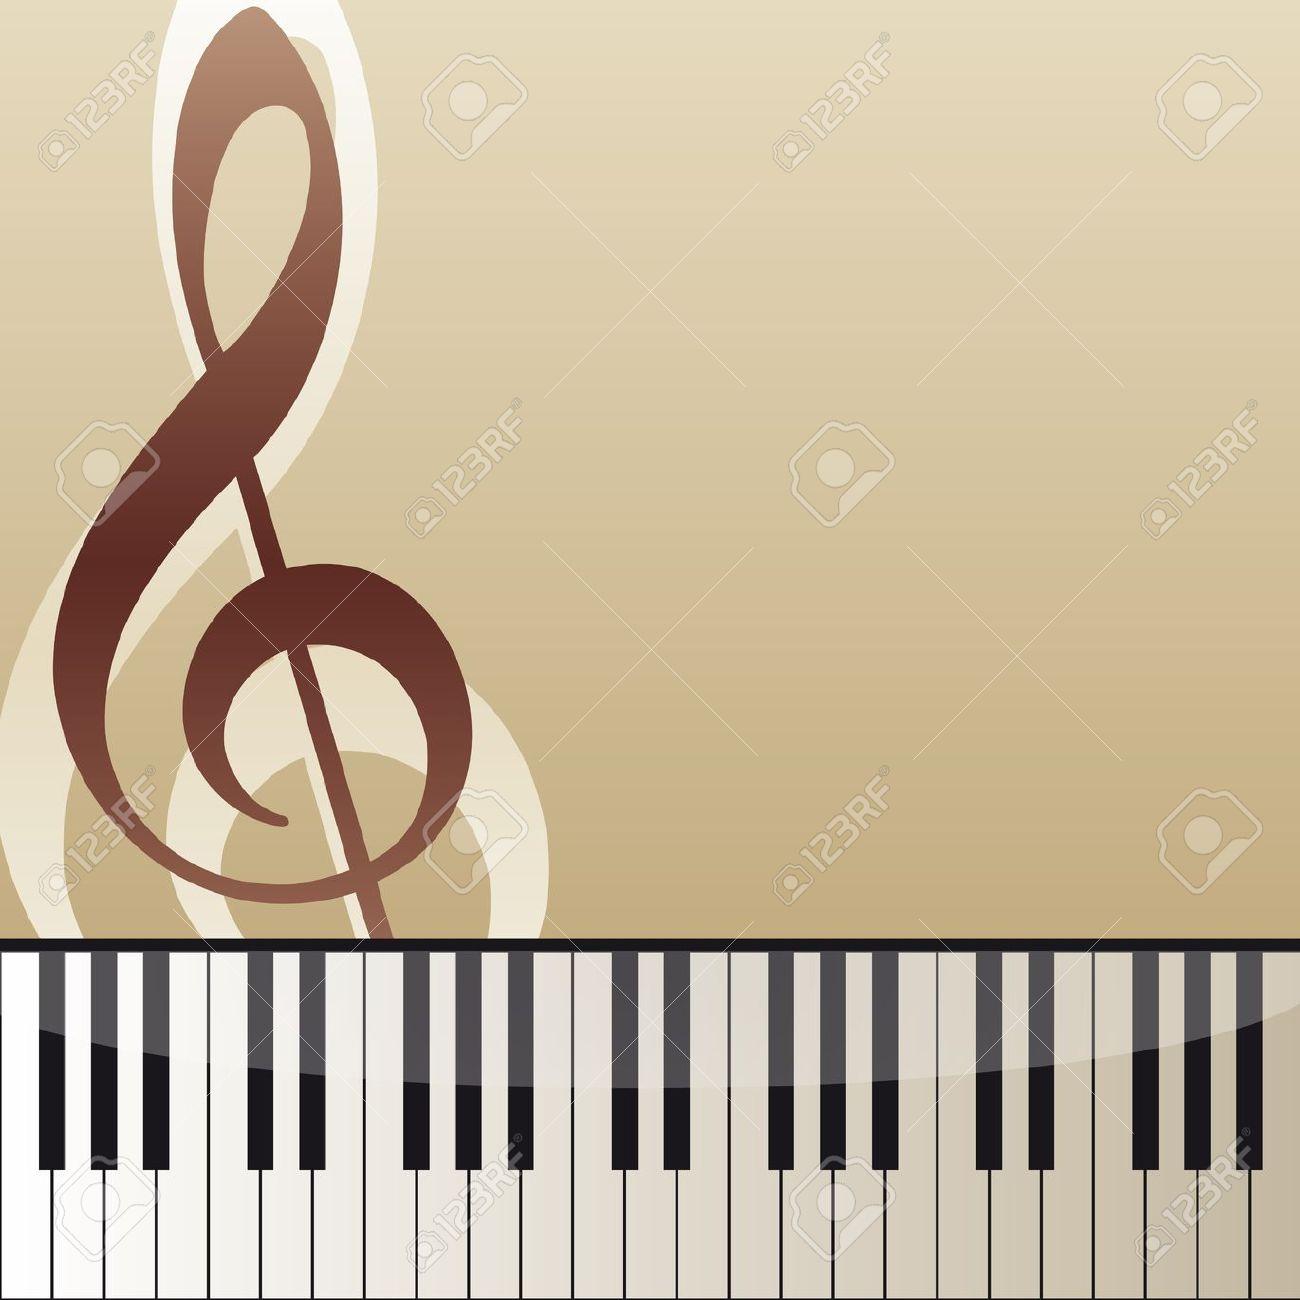 Music Background With Piano Keyboard And Violin Key Royalty Free